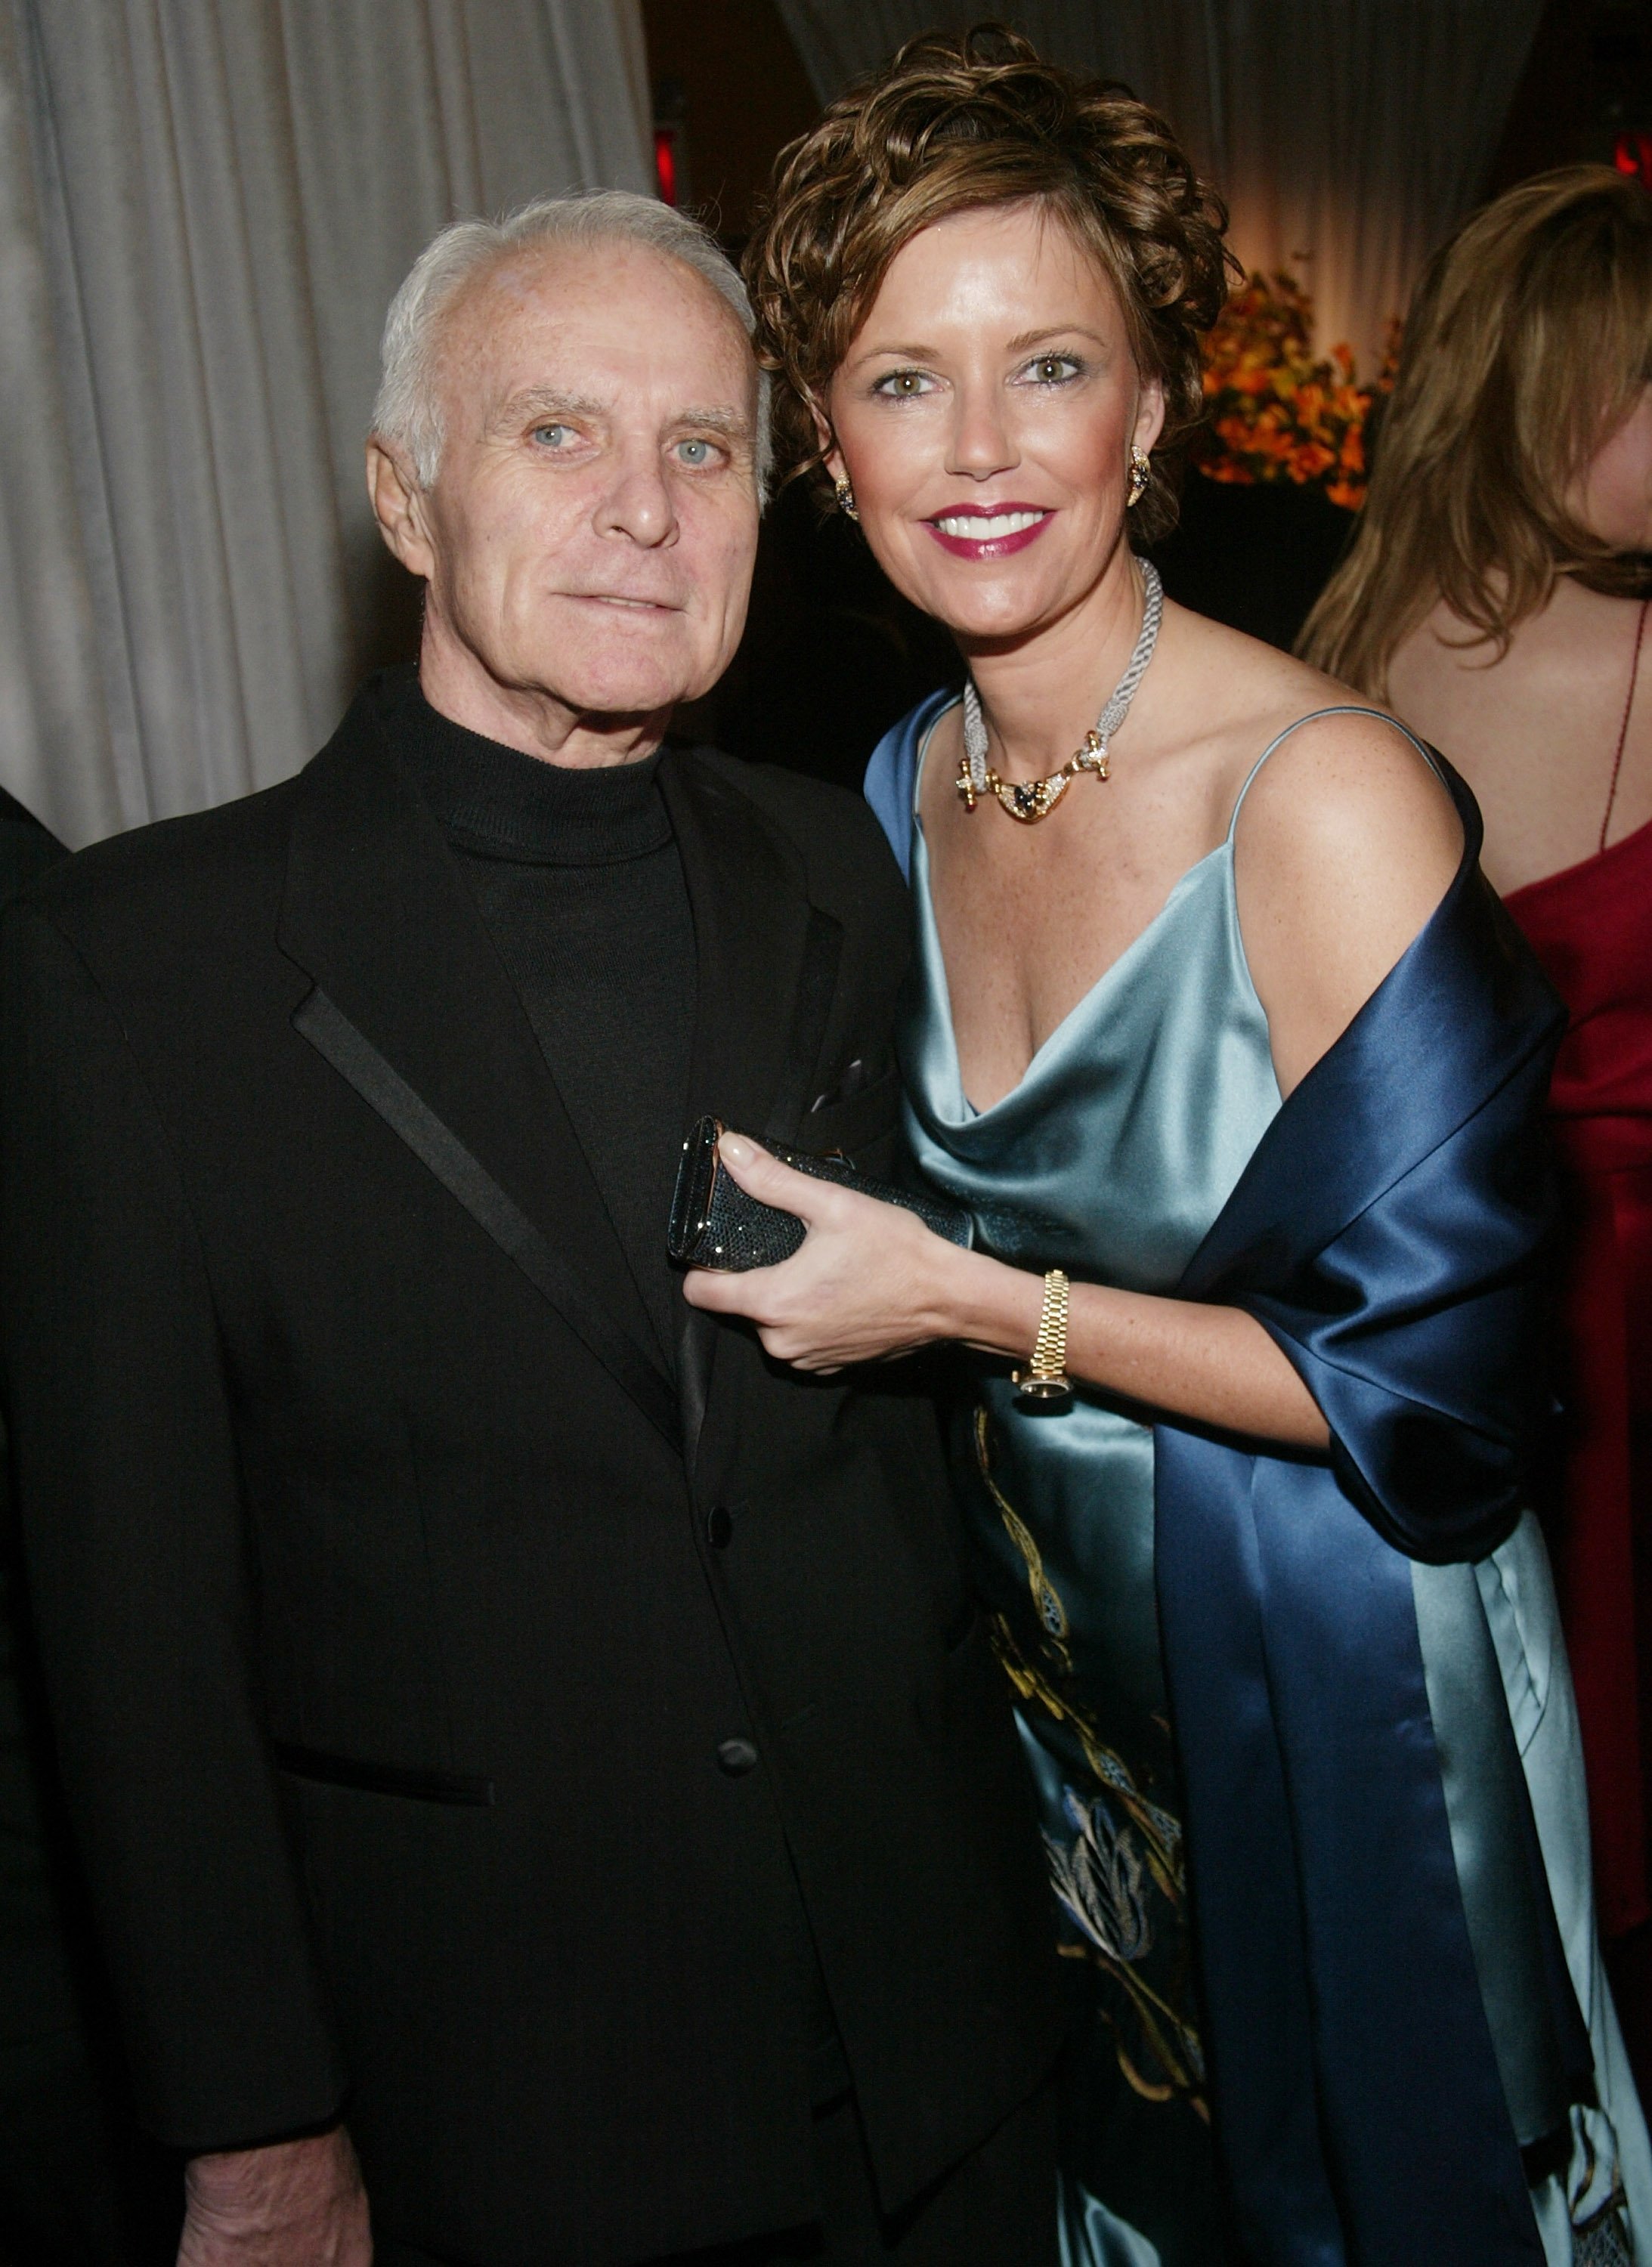 Robert Conrad and wife LaVelda at the cocktail party for the "CBS at 75" television gala at the Hammerstein Ballroom in New York City | Photo: Evan Agostini/Getty Images